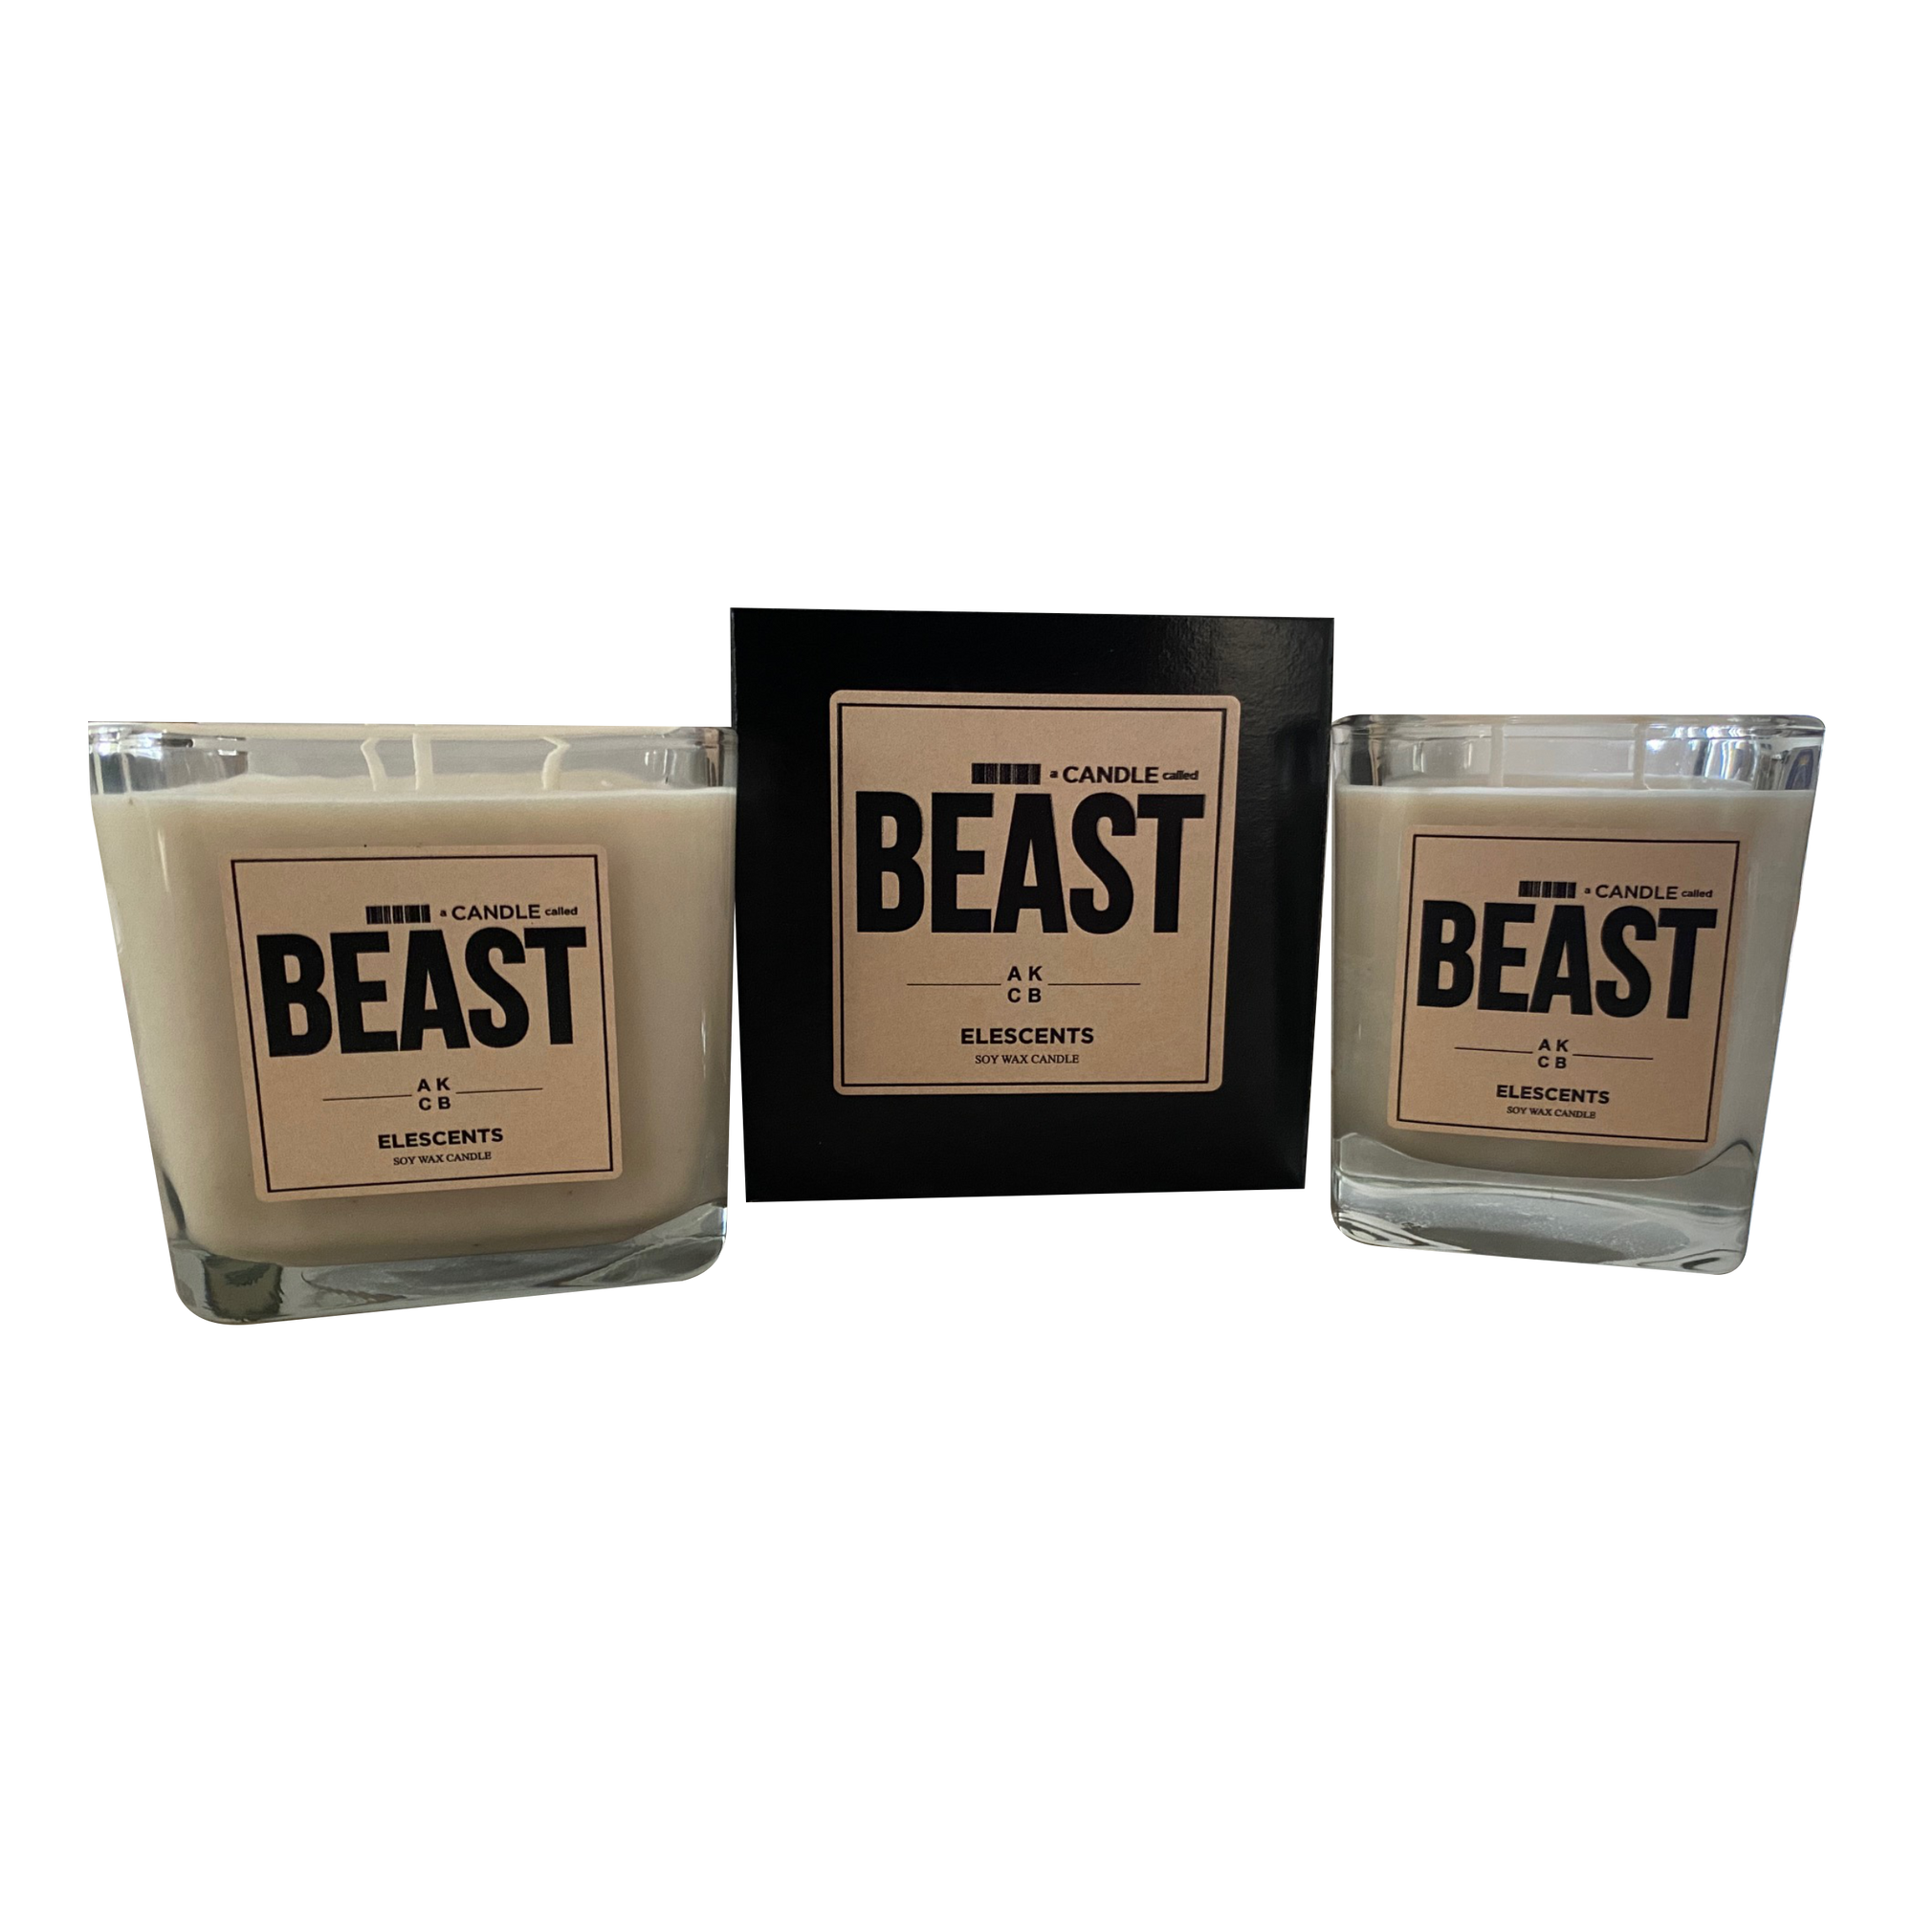 A Candle Called Beast